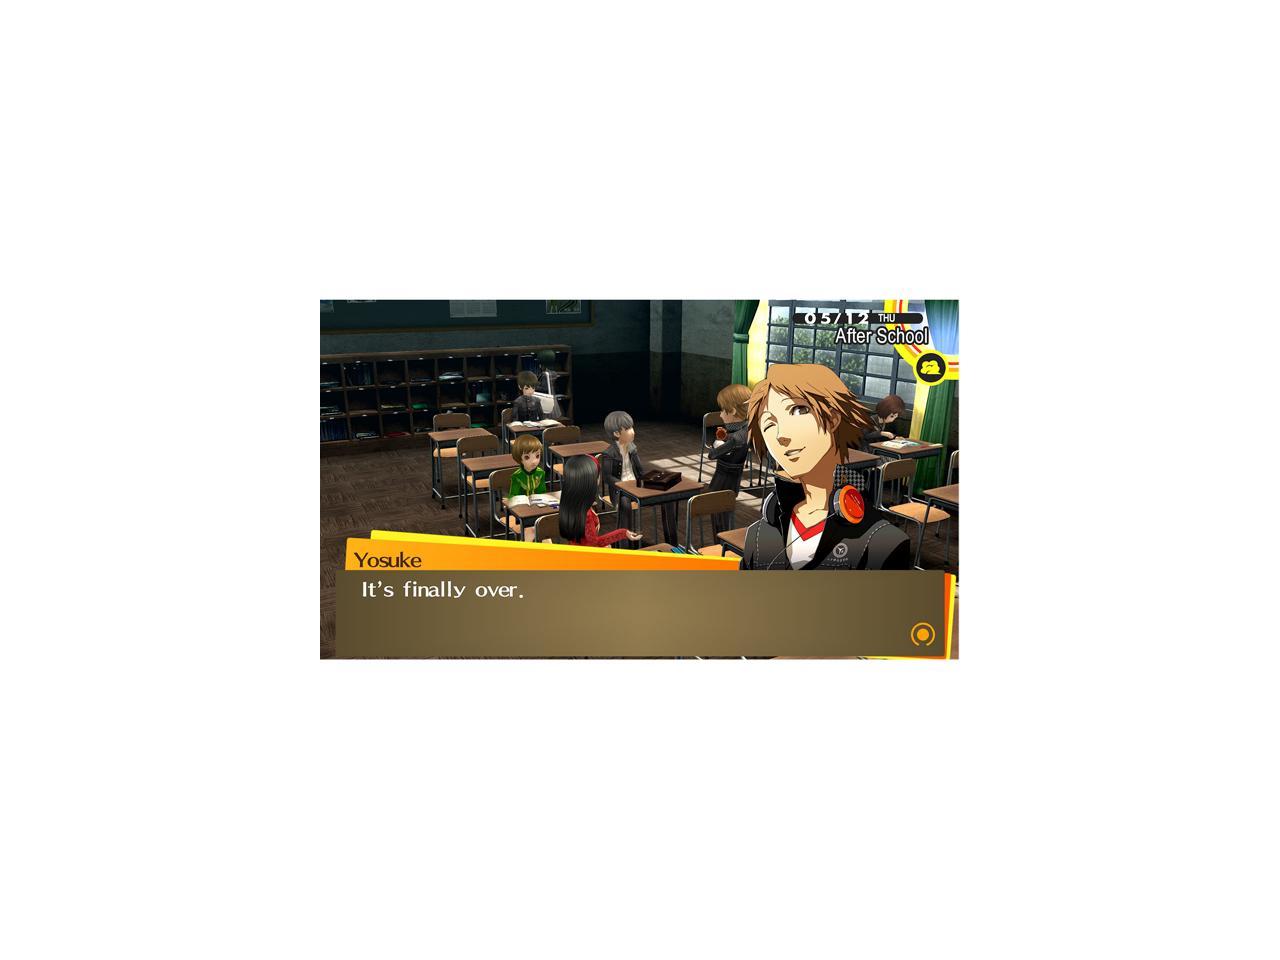 persona 4 golden save game editor